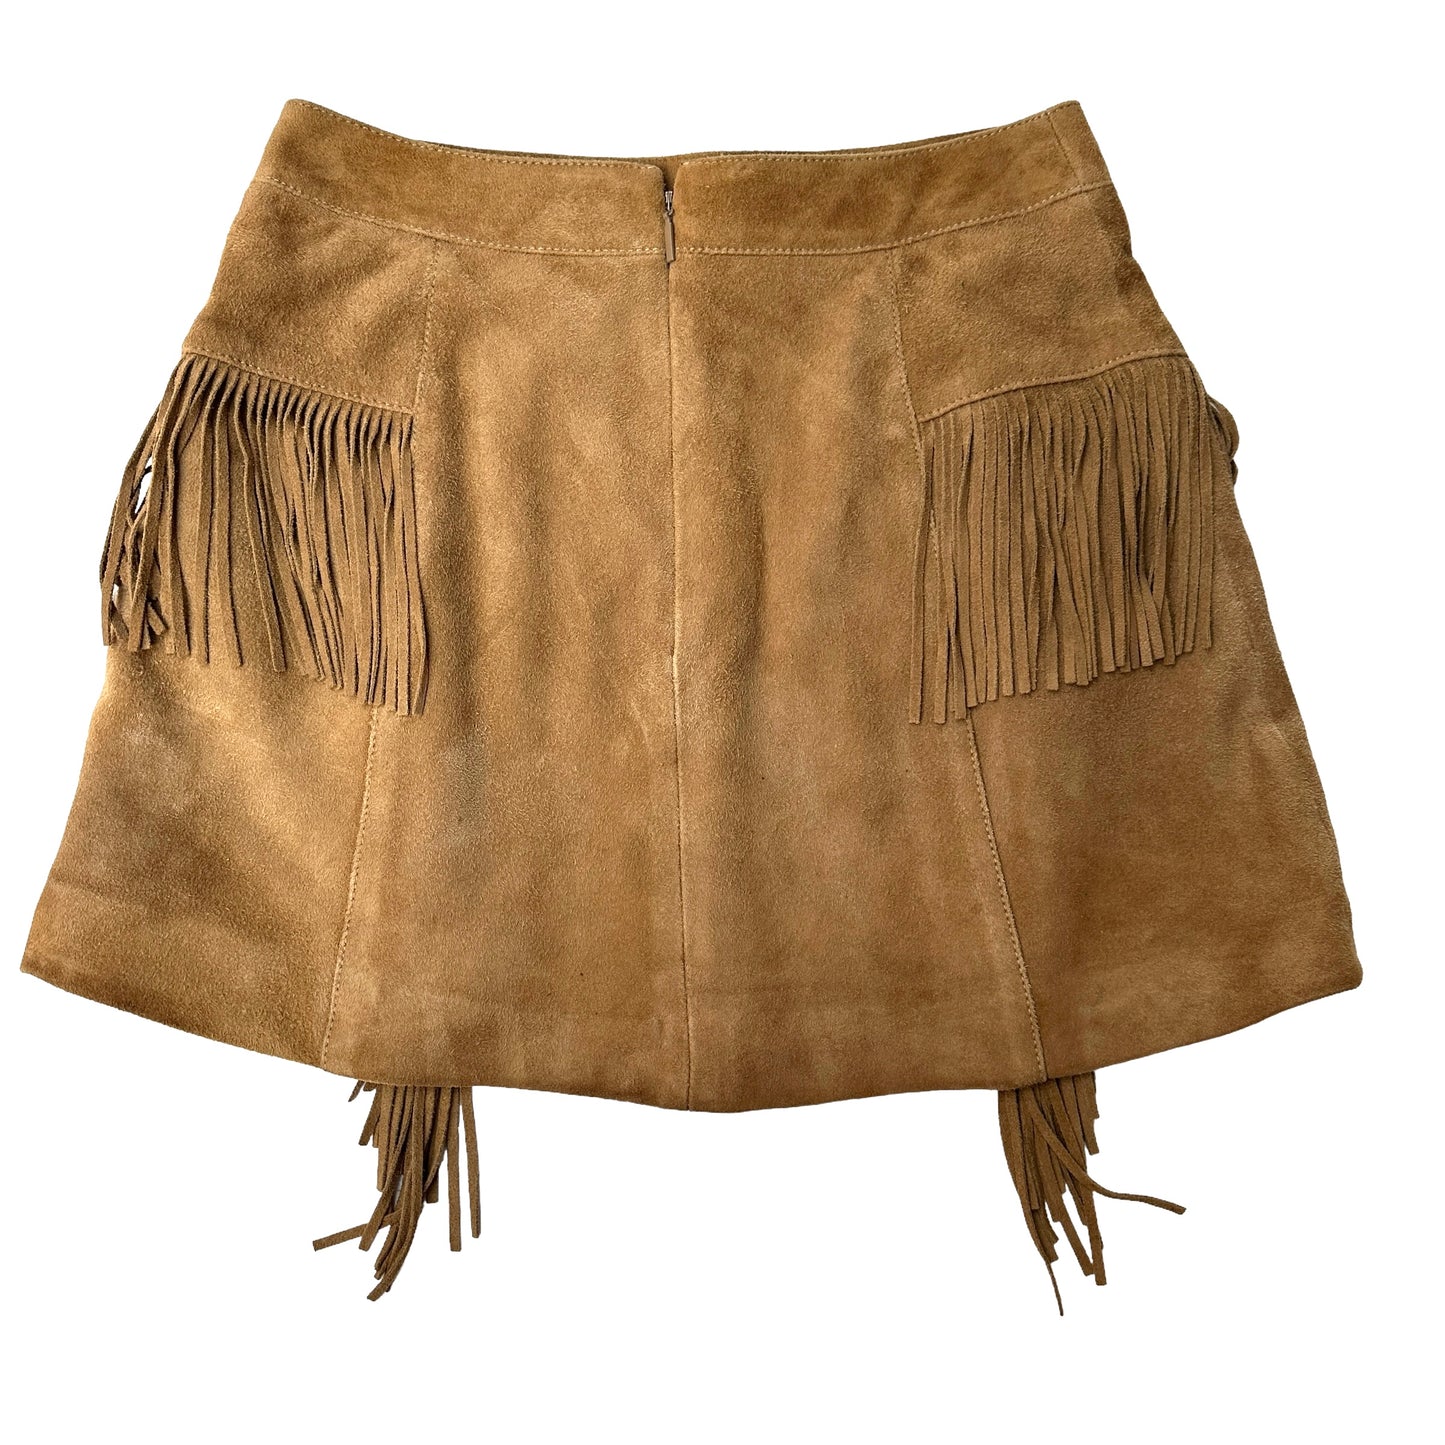 Brown Suede Mini Skirt w/Fringes - XS